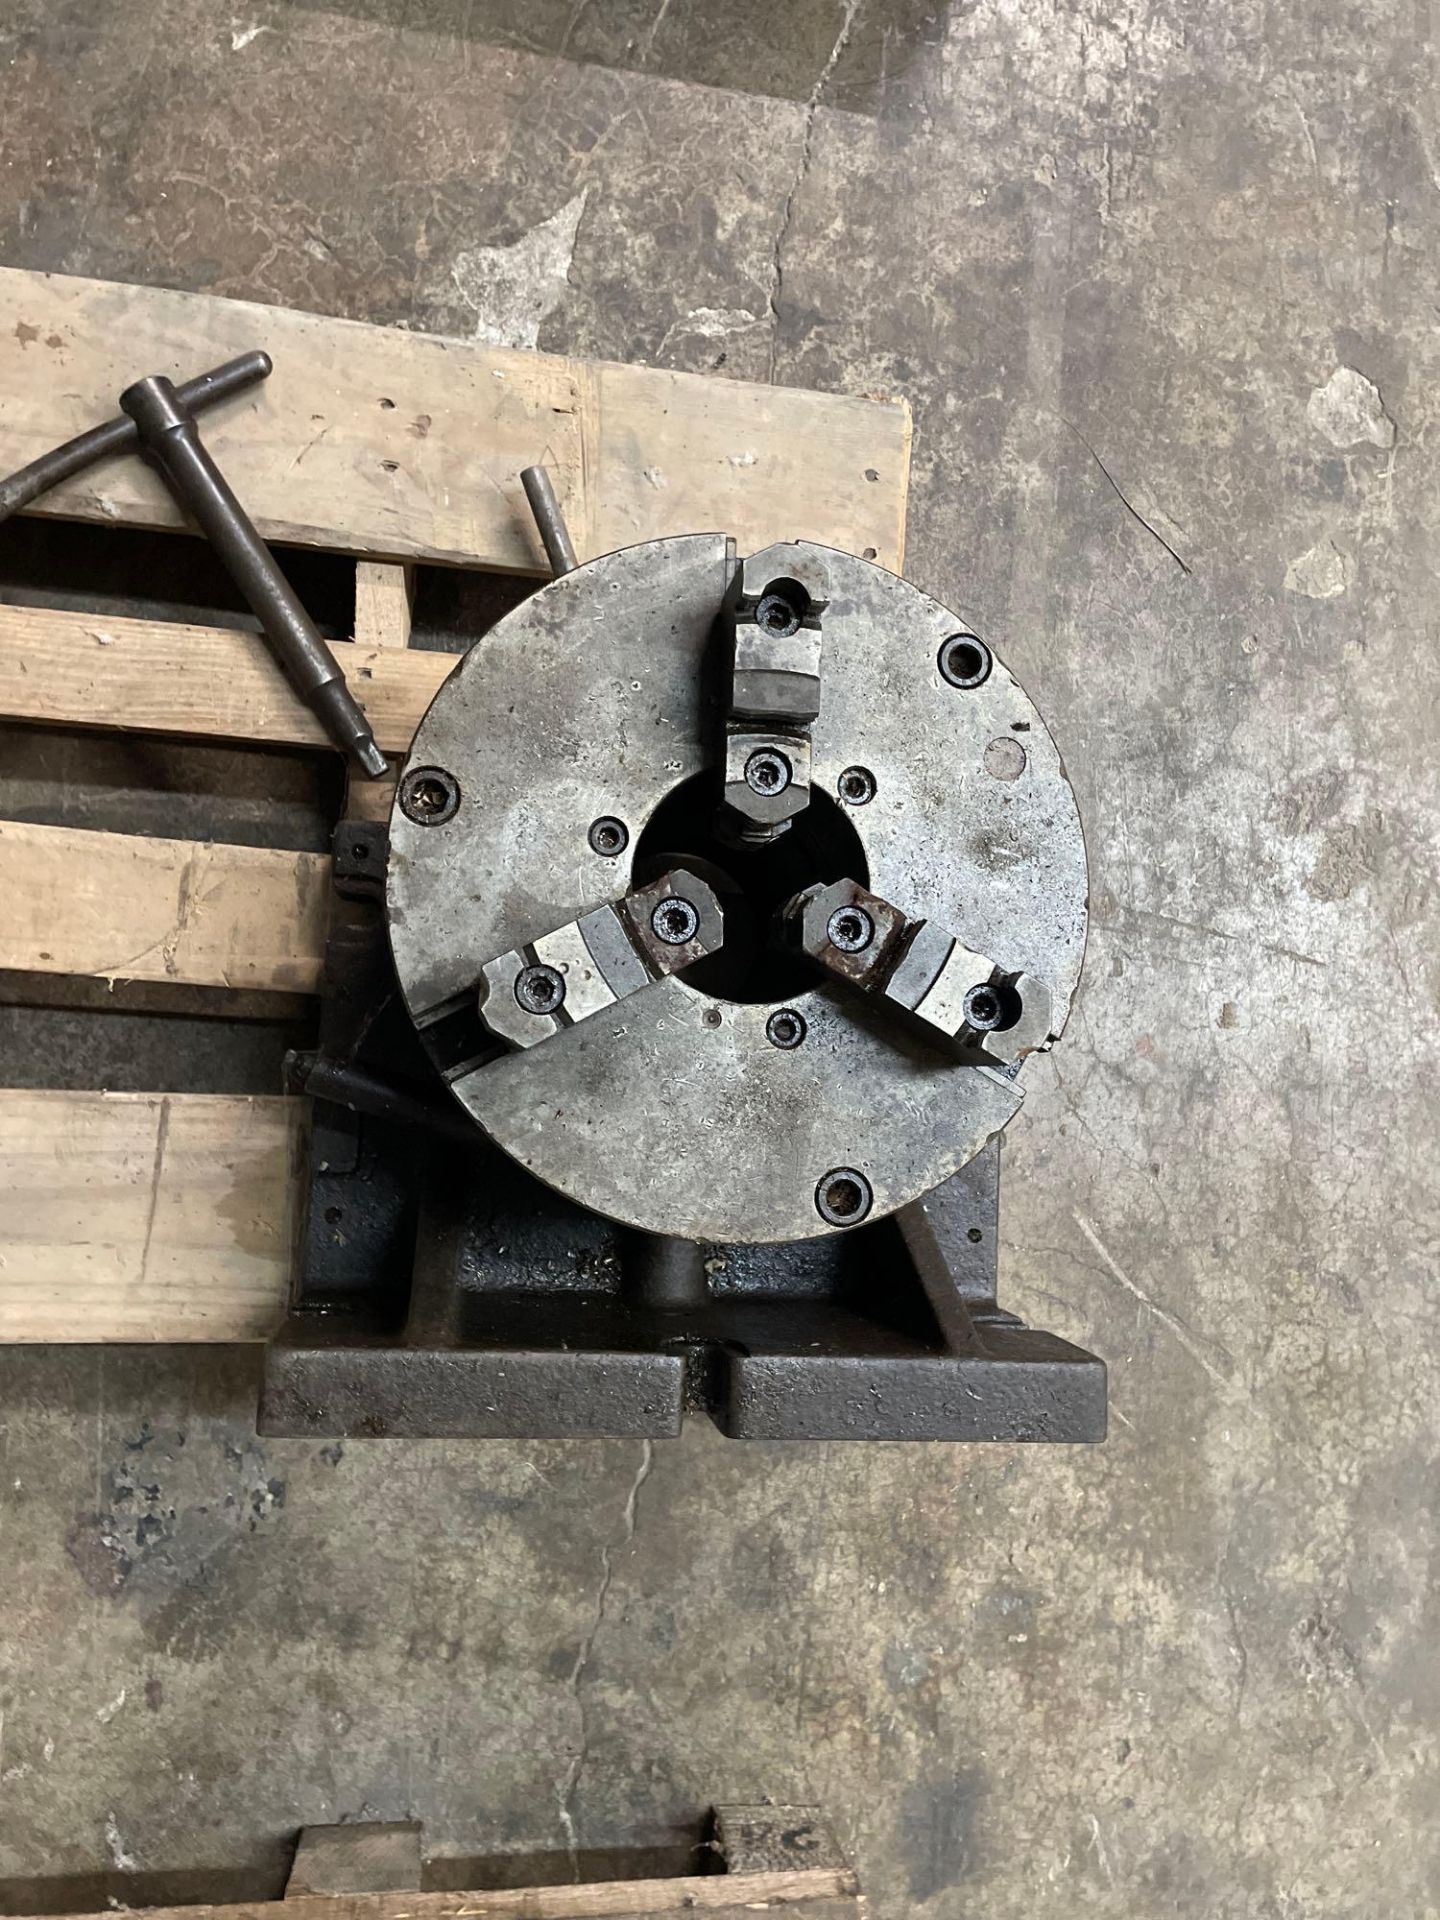 Horizontal and Vertical Mounting Rotary Table 12 1/2” 3 Jaw Chuck with 4” Thru Hole